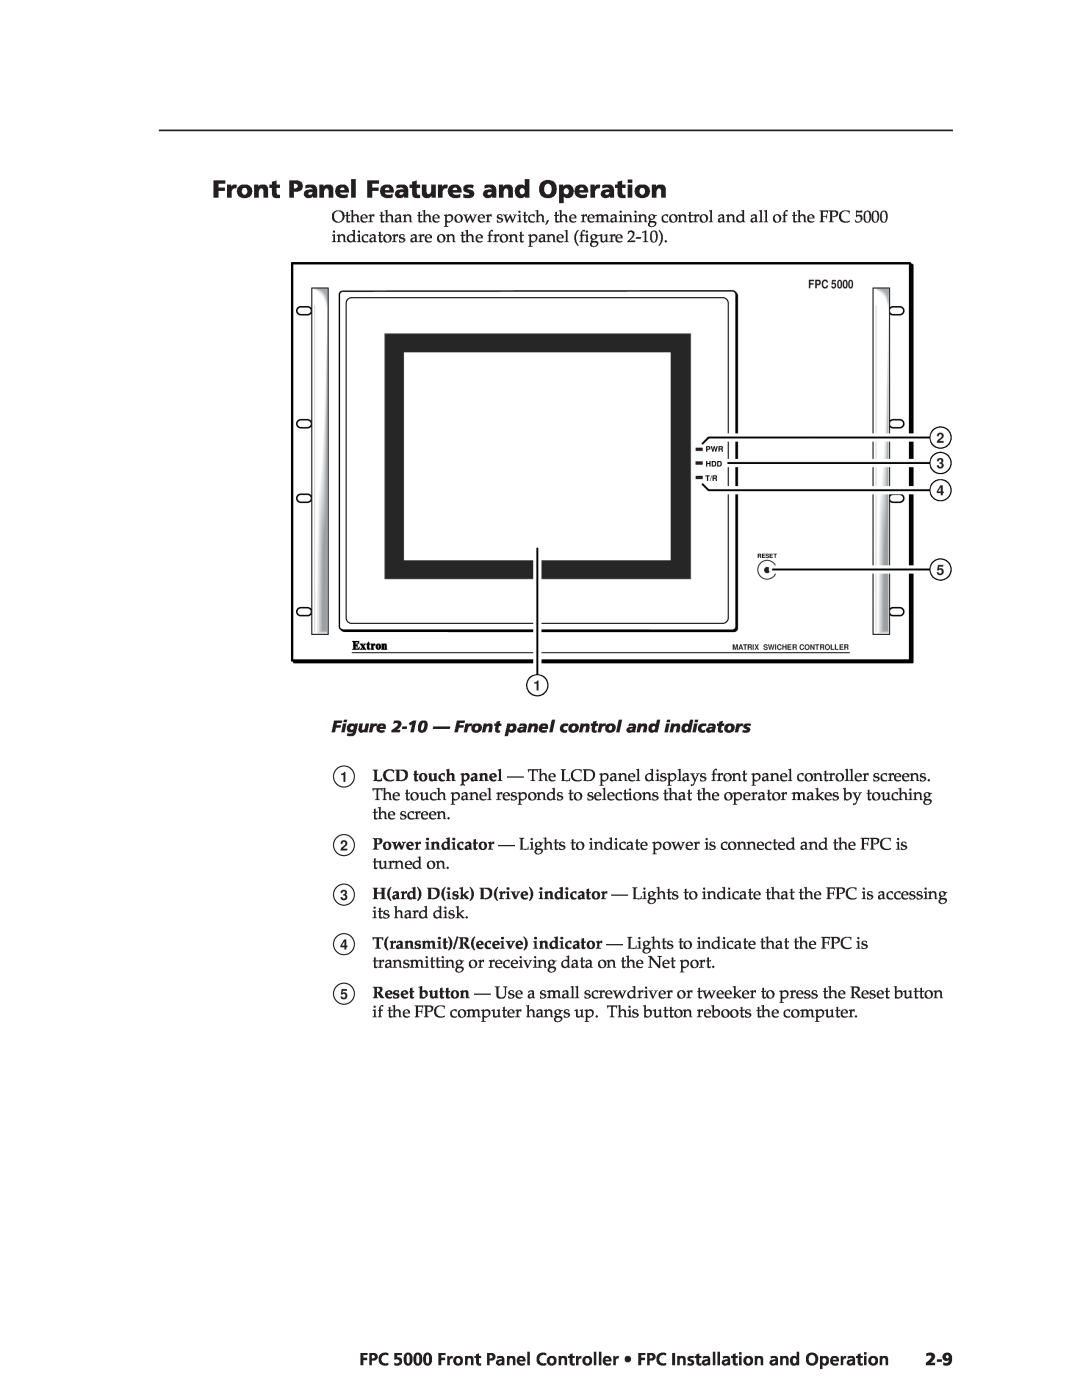 Extron electronic FPC 5000 manual Front Panel Features and Operation, 10 - Front panel control and indicators 